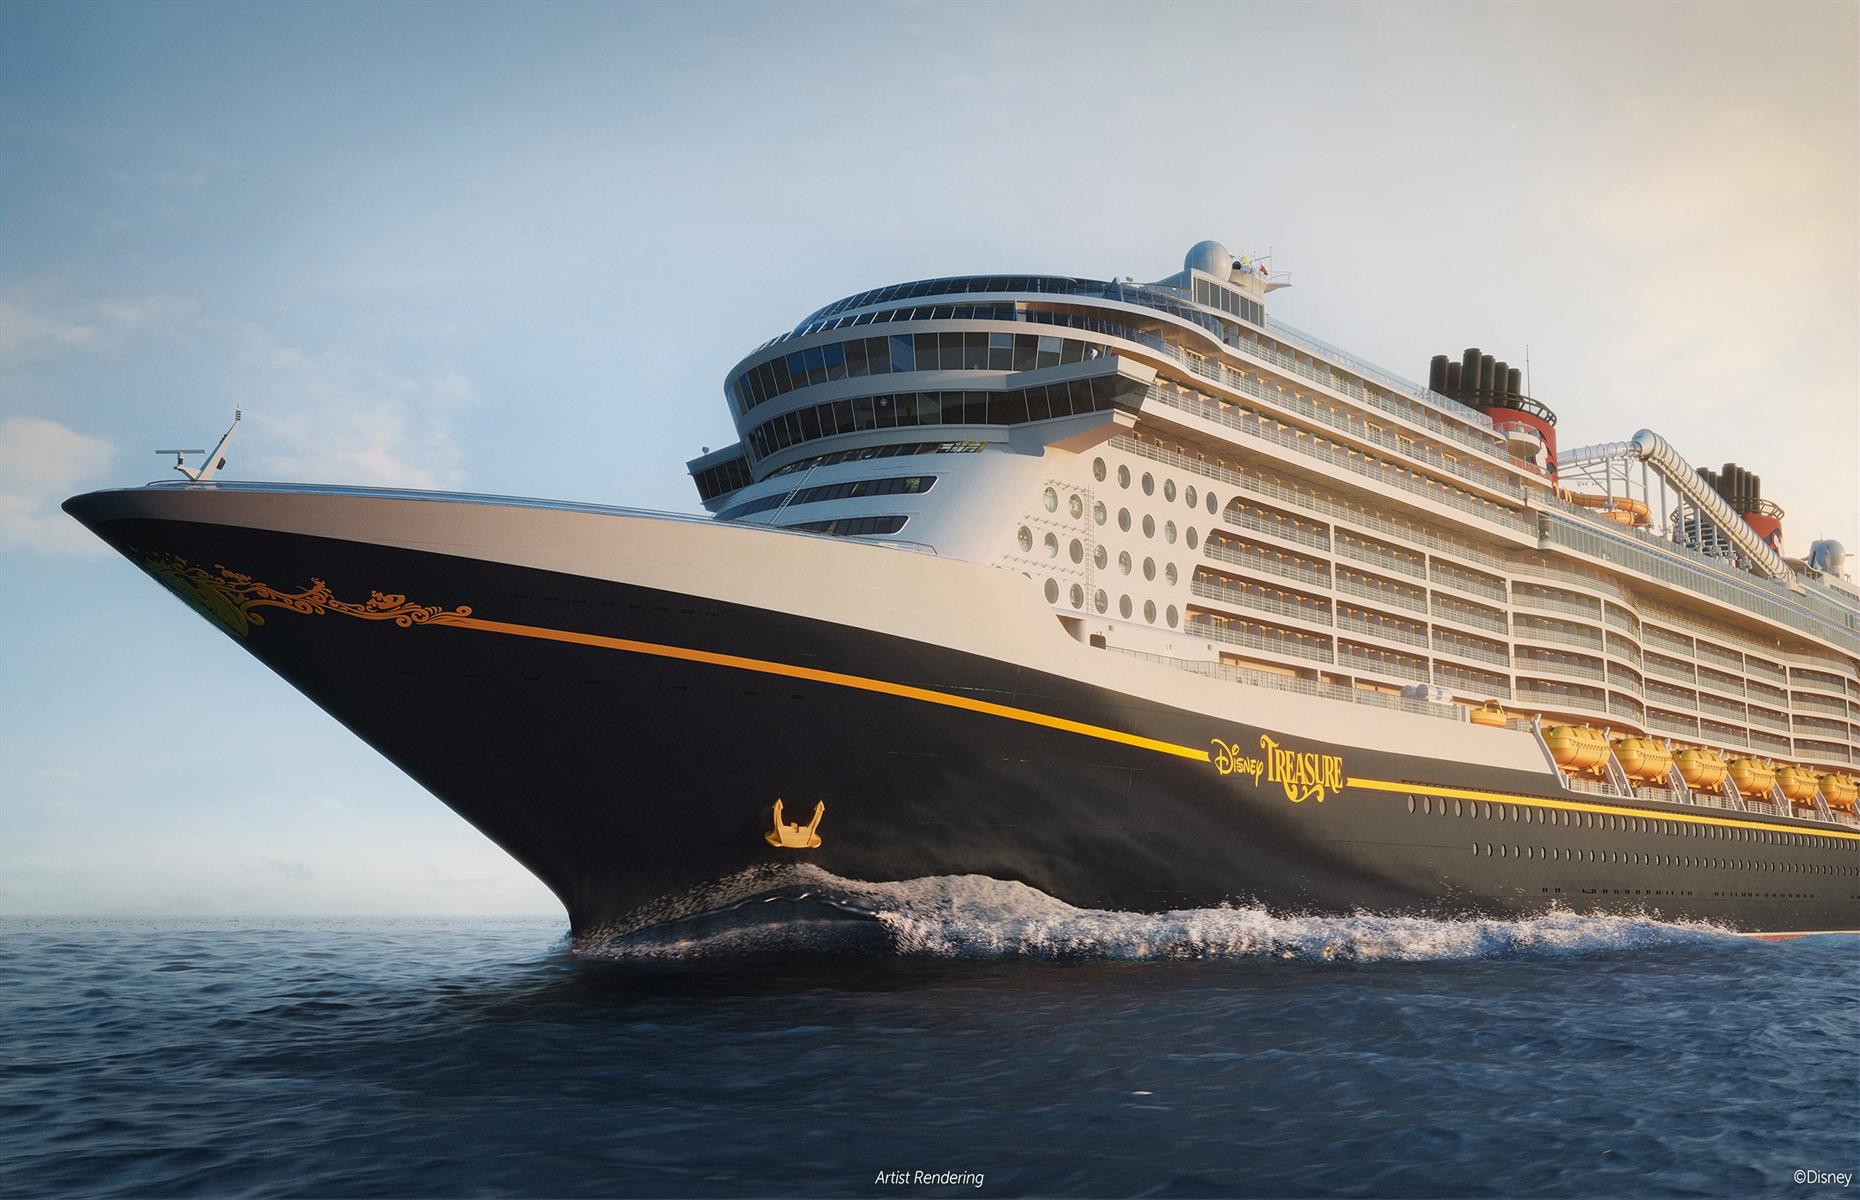 <p>The vast majority of the ship’s 1,256 staterooms will offer an ocean view, while 70% will have a veranda. Other highlights will include the Grand Hall, where passengers can meet their favourite Disney characters; the Walt Disney Theatre, which will be the setting for Broadway-quality shows; and the Hero Zone, a fun-filled area where passengers can take part in game show-style competitions and sign up for action-packed physical challenges.</p>